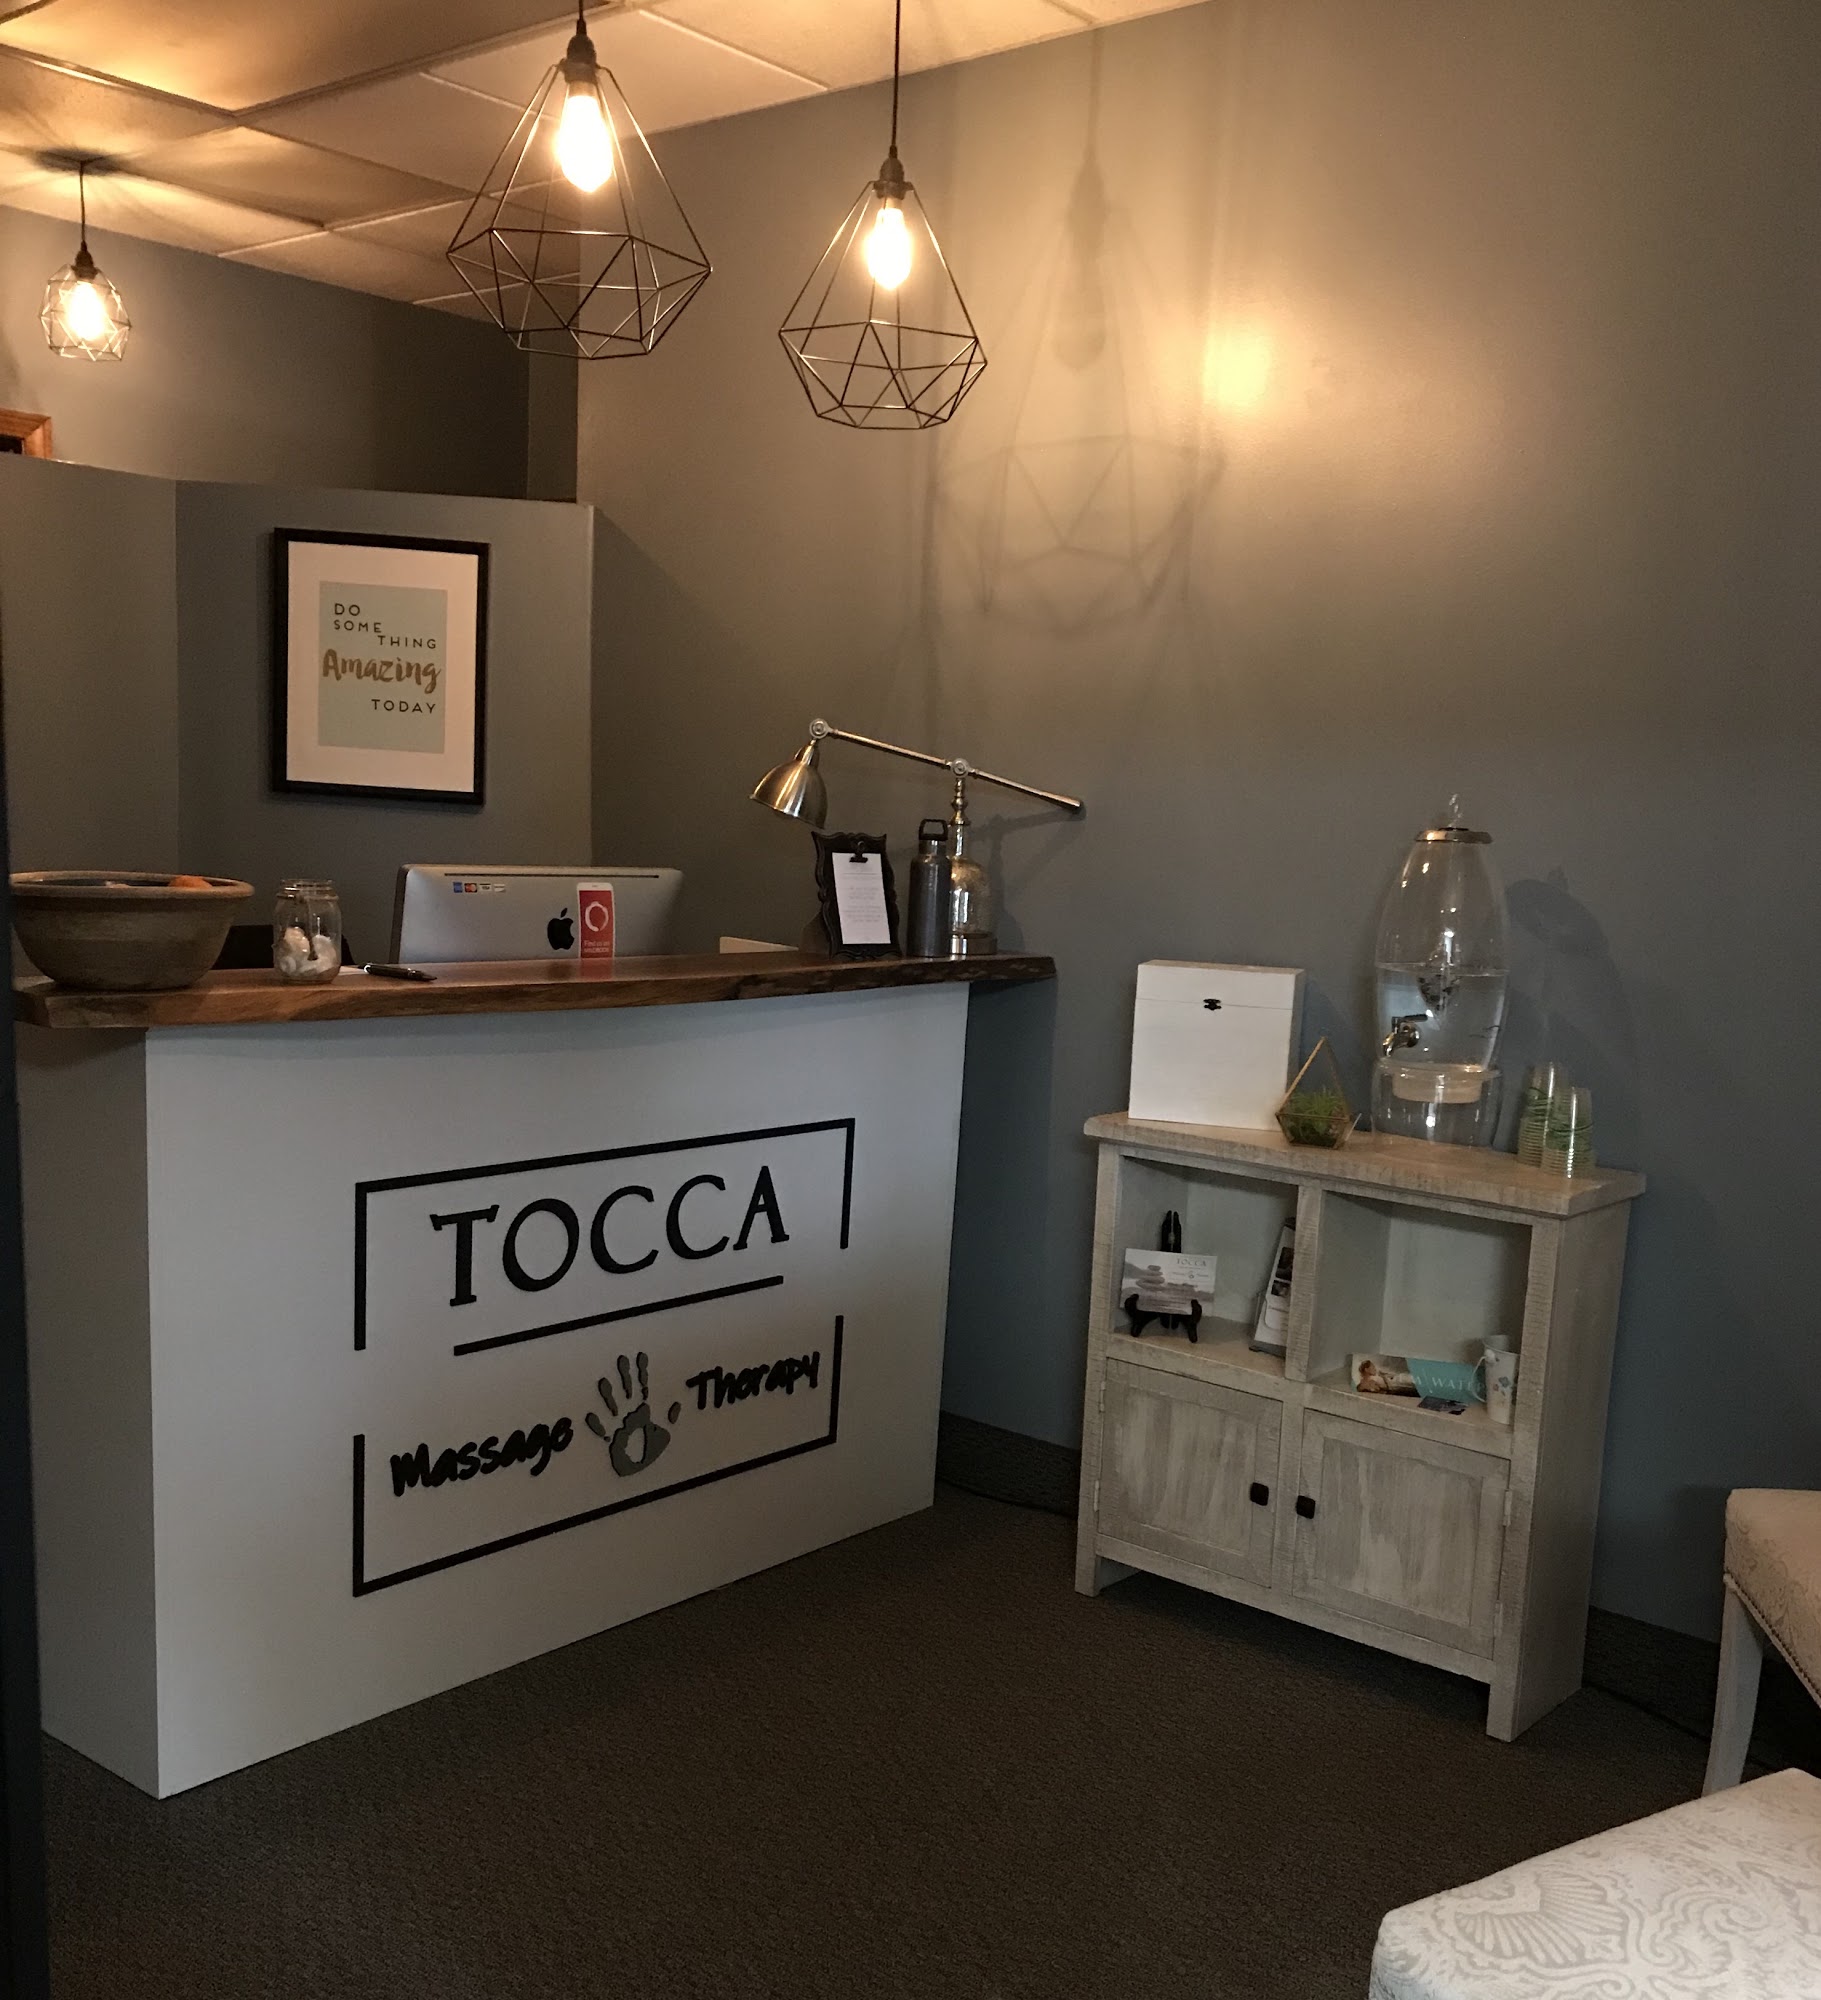 Tocca Massage Therapy